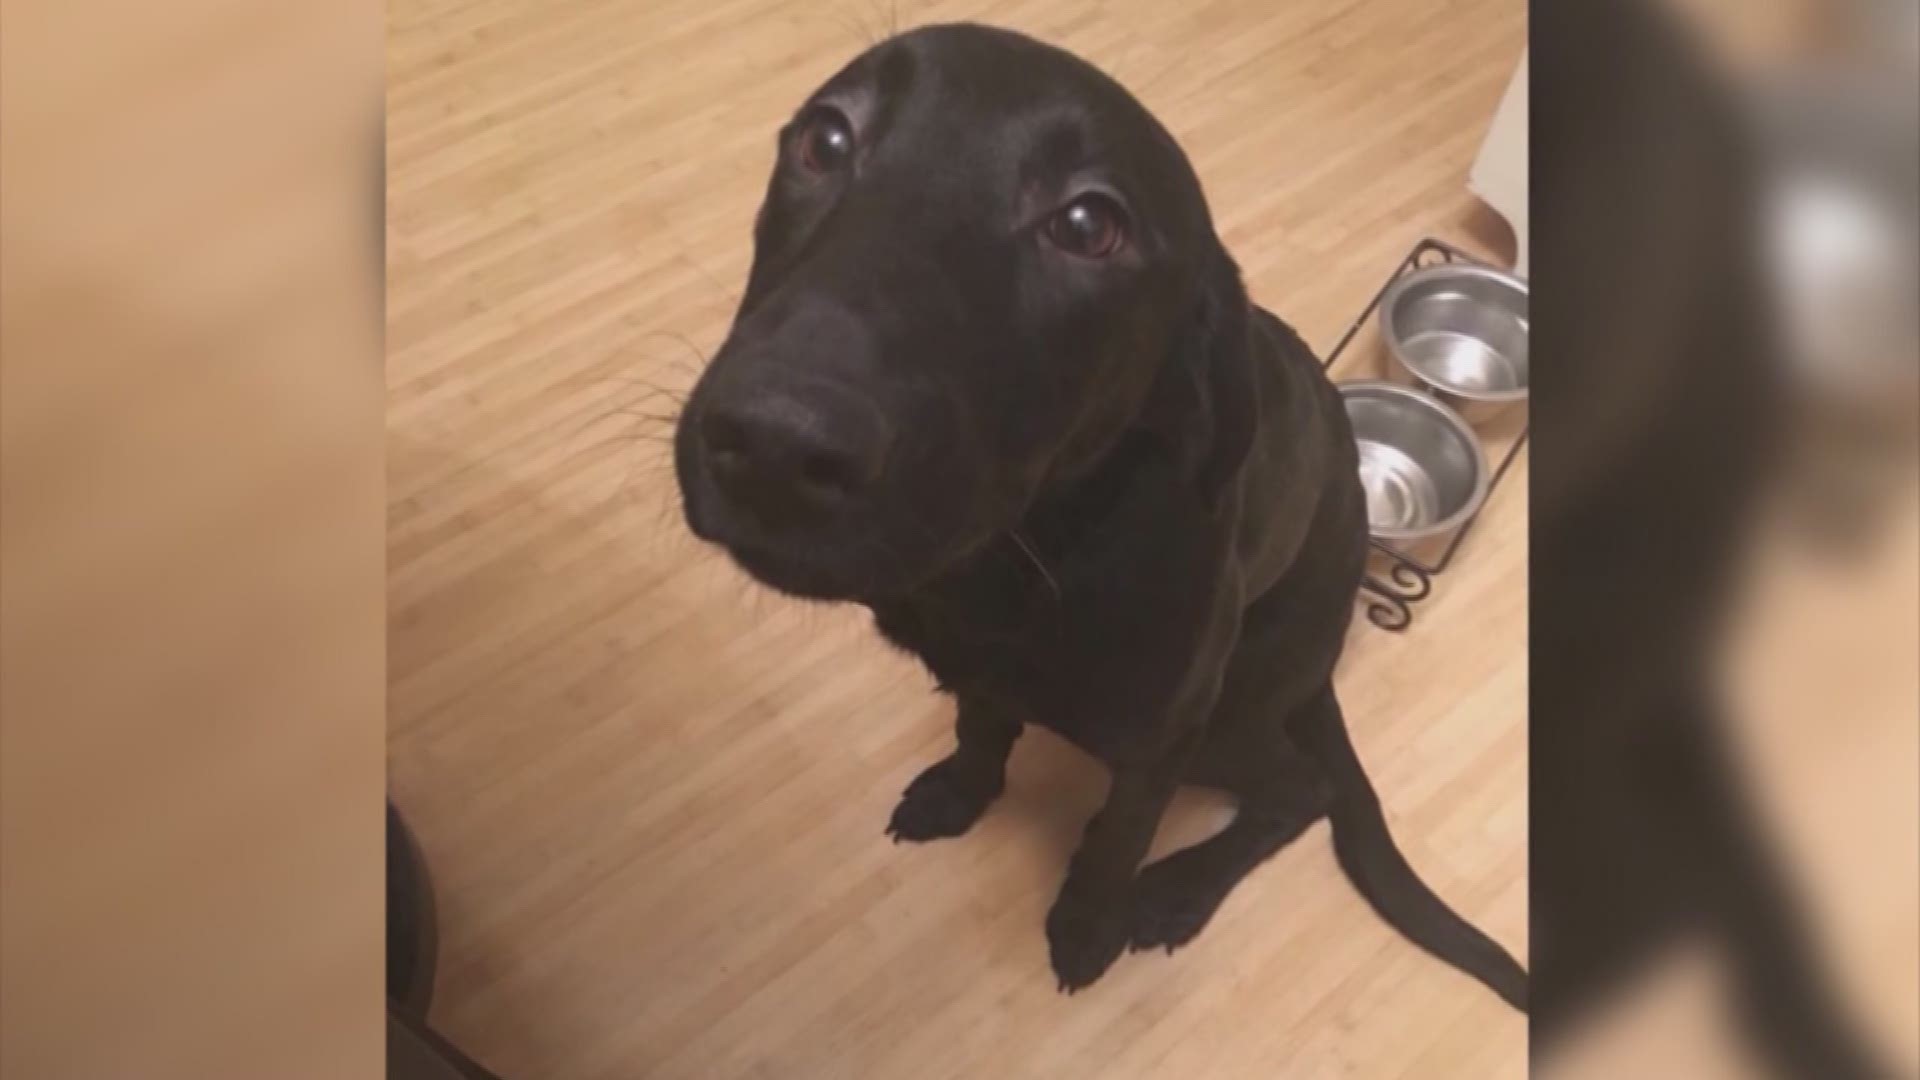 A series of good deeds turns into heartbreak for a dog owner. The woman is holding out hope that she'll get her one-year-old black lab "mila" back -- after another family adopted her.